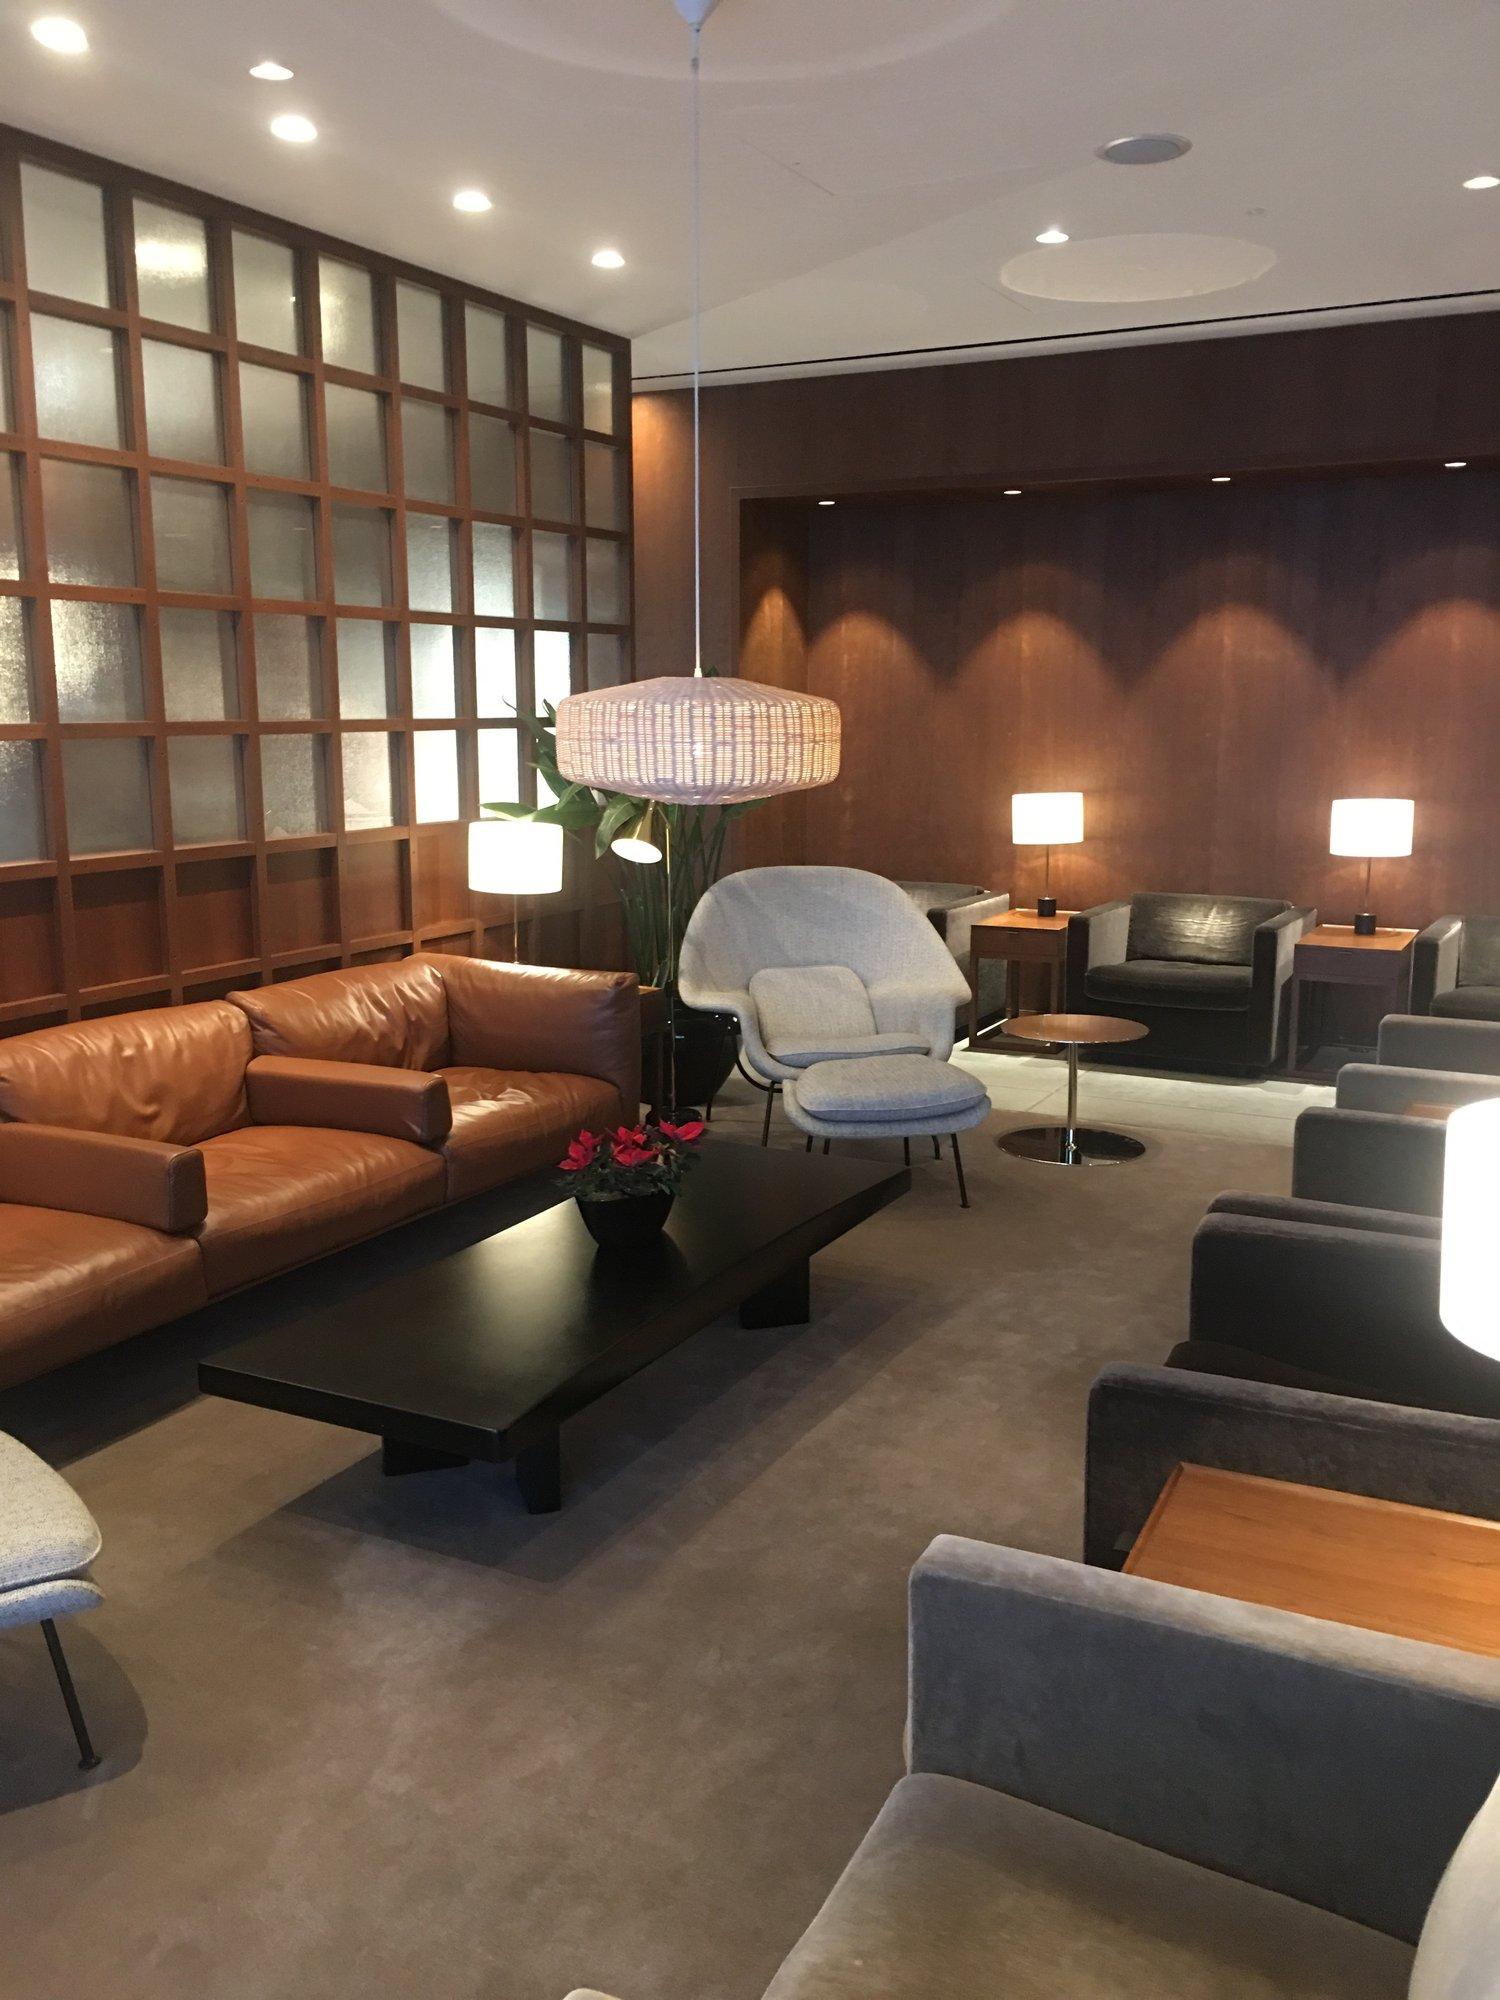 Cathay Pacific Business Class Lounge image 48 of 48